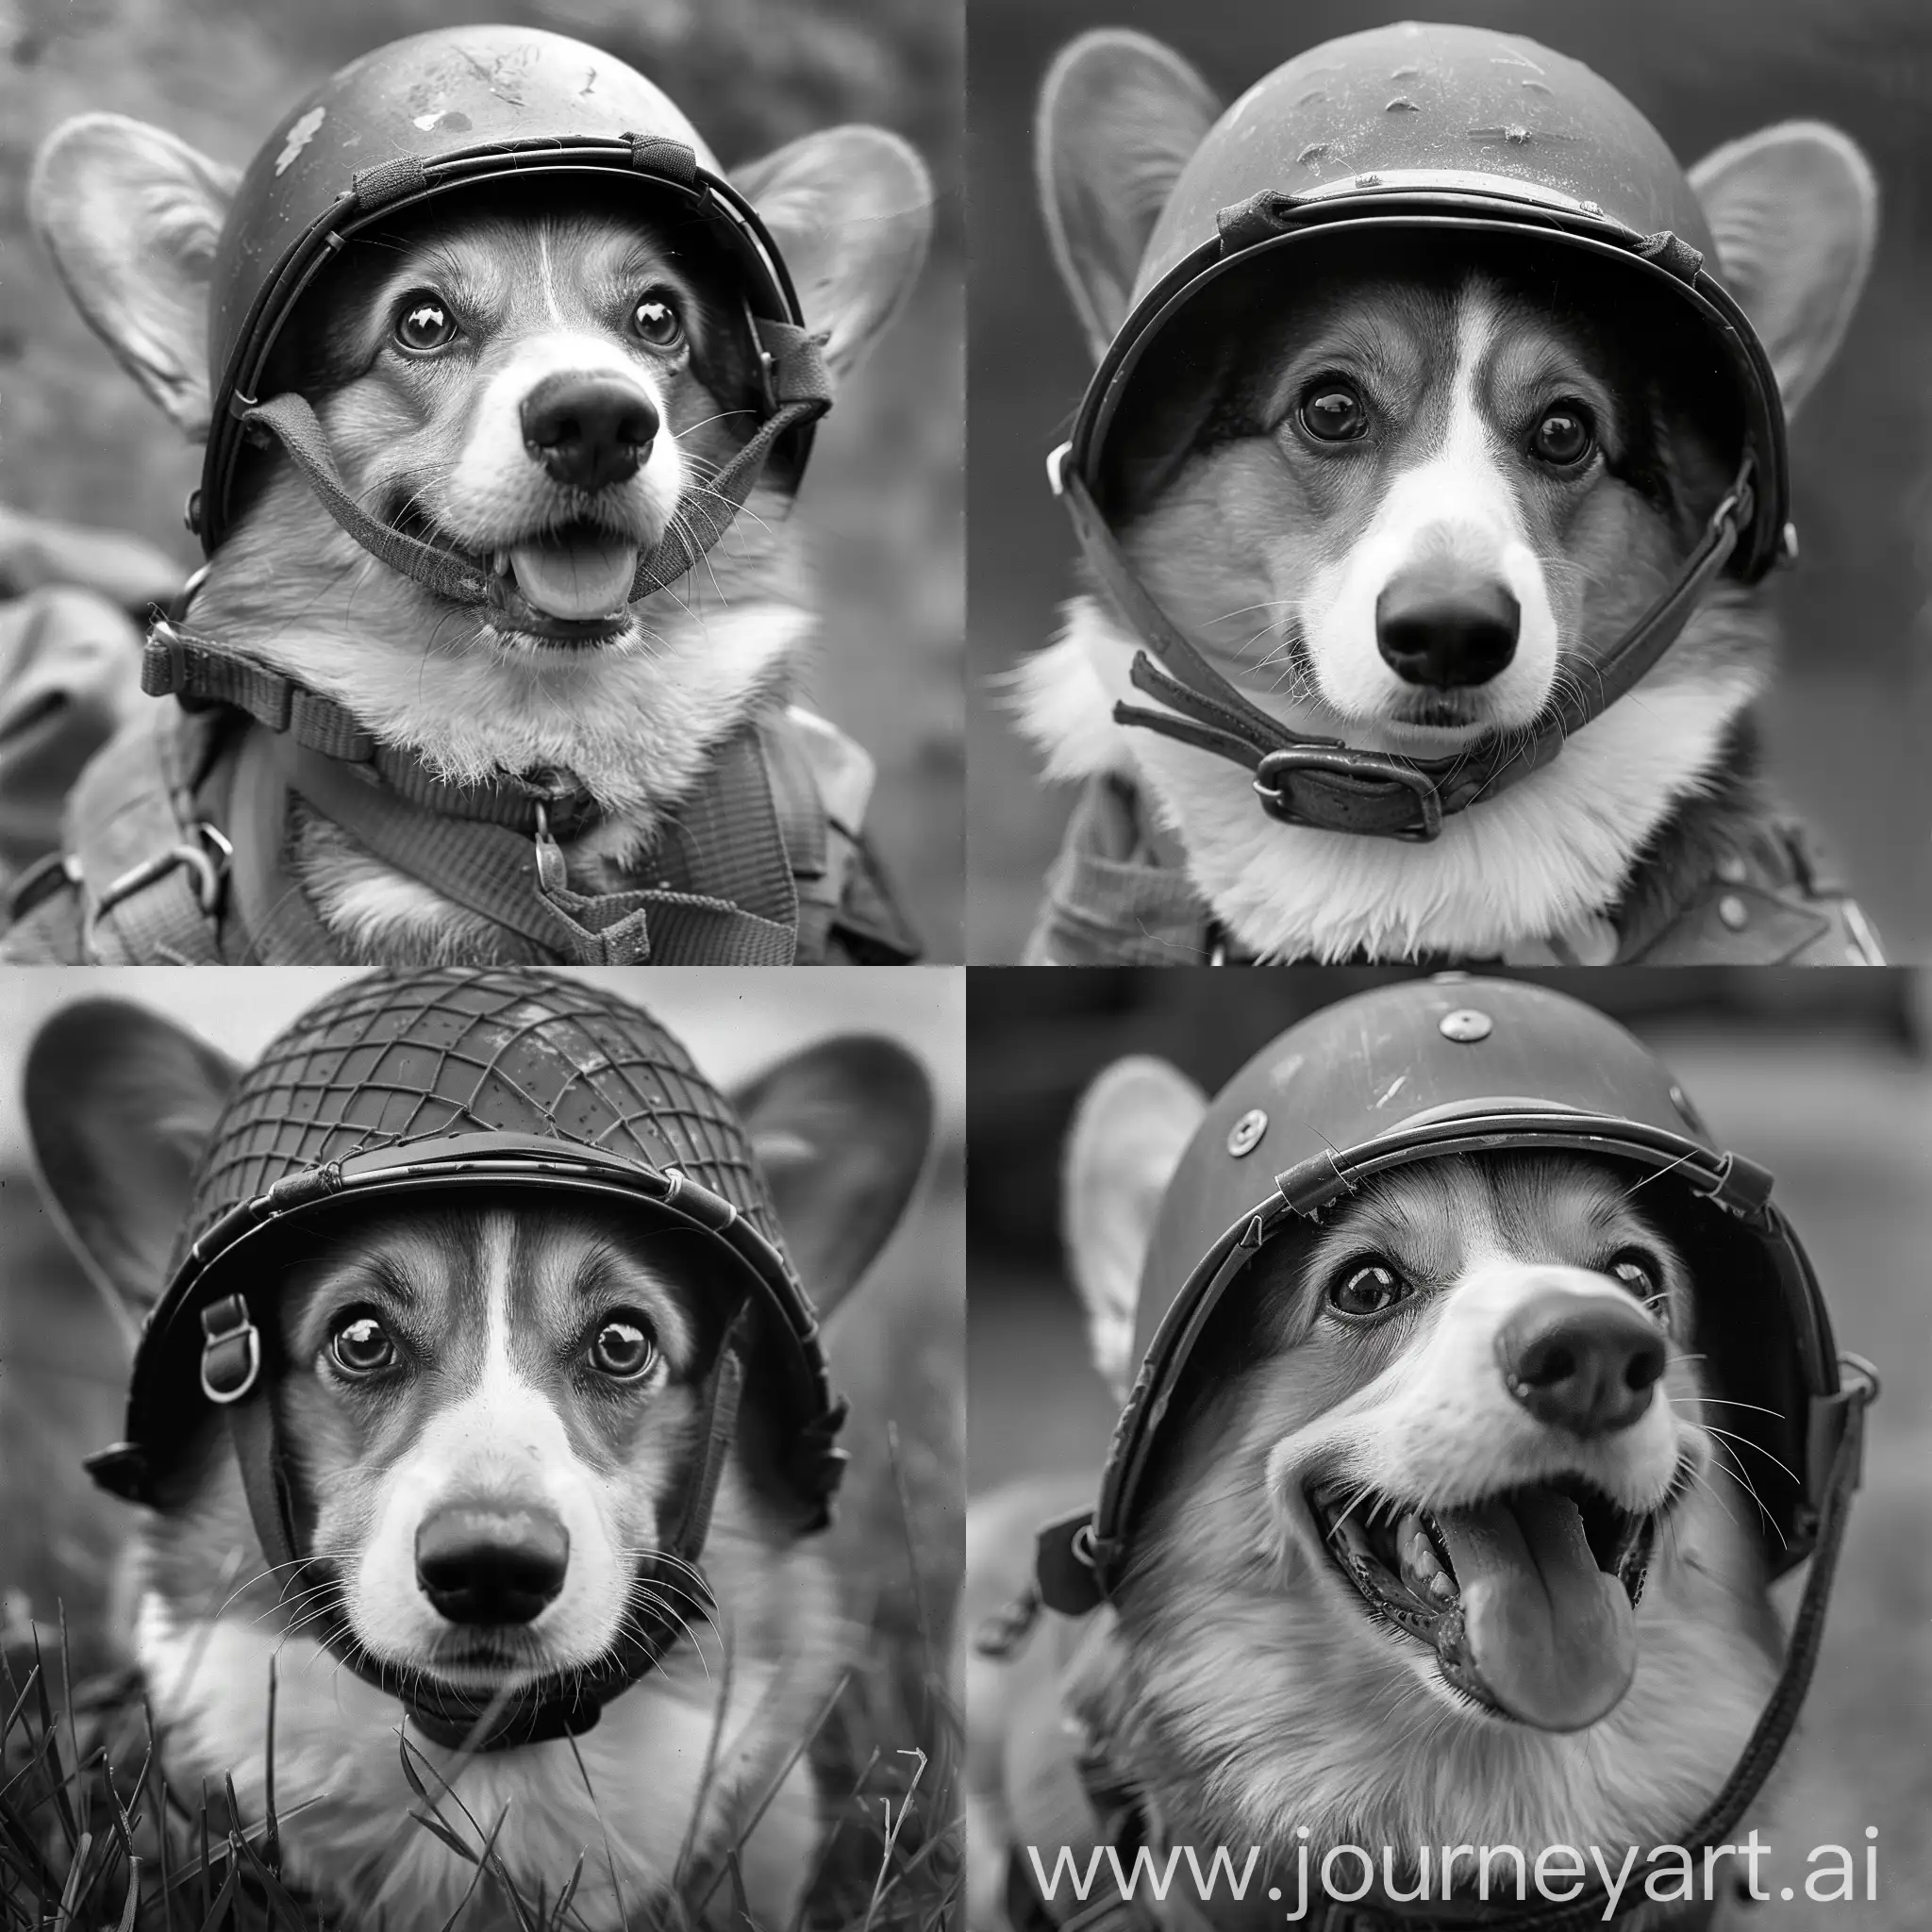 Close up of a corgi wearing soldier helmet in the battle, ww2 historical photography, black & white, 10.5mm, f 0.95